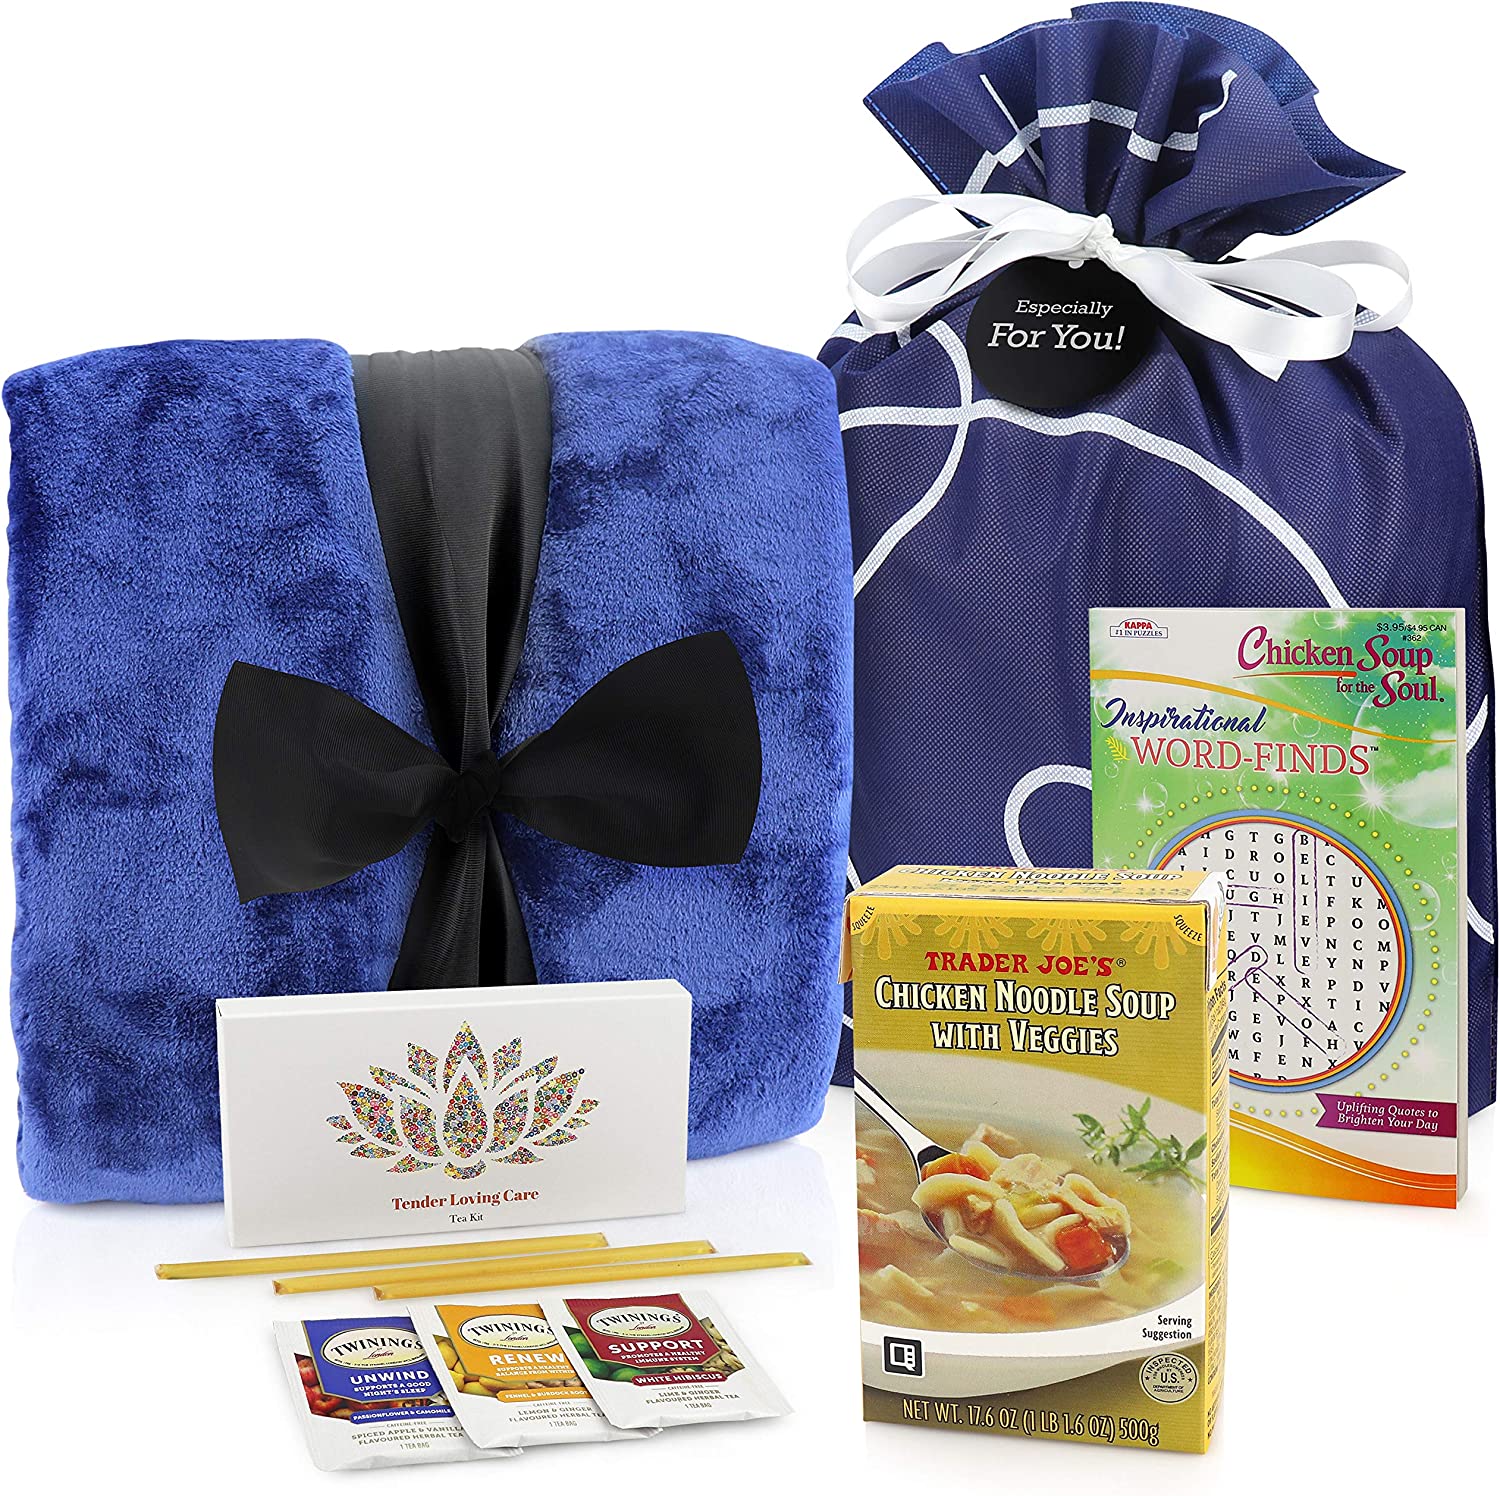  Get Well Gifts Bag